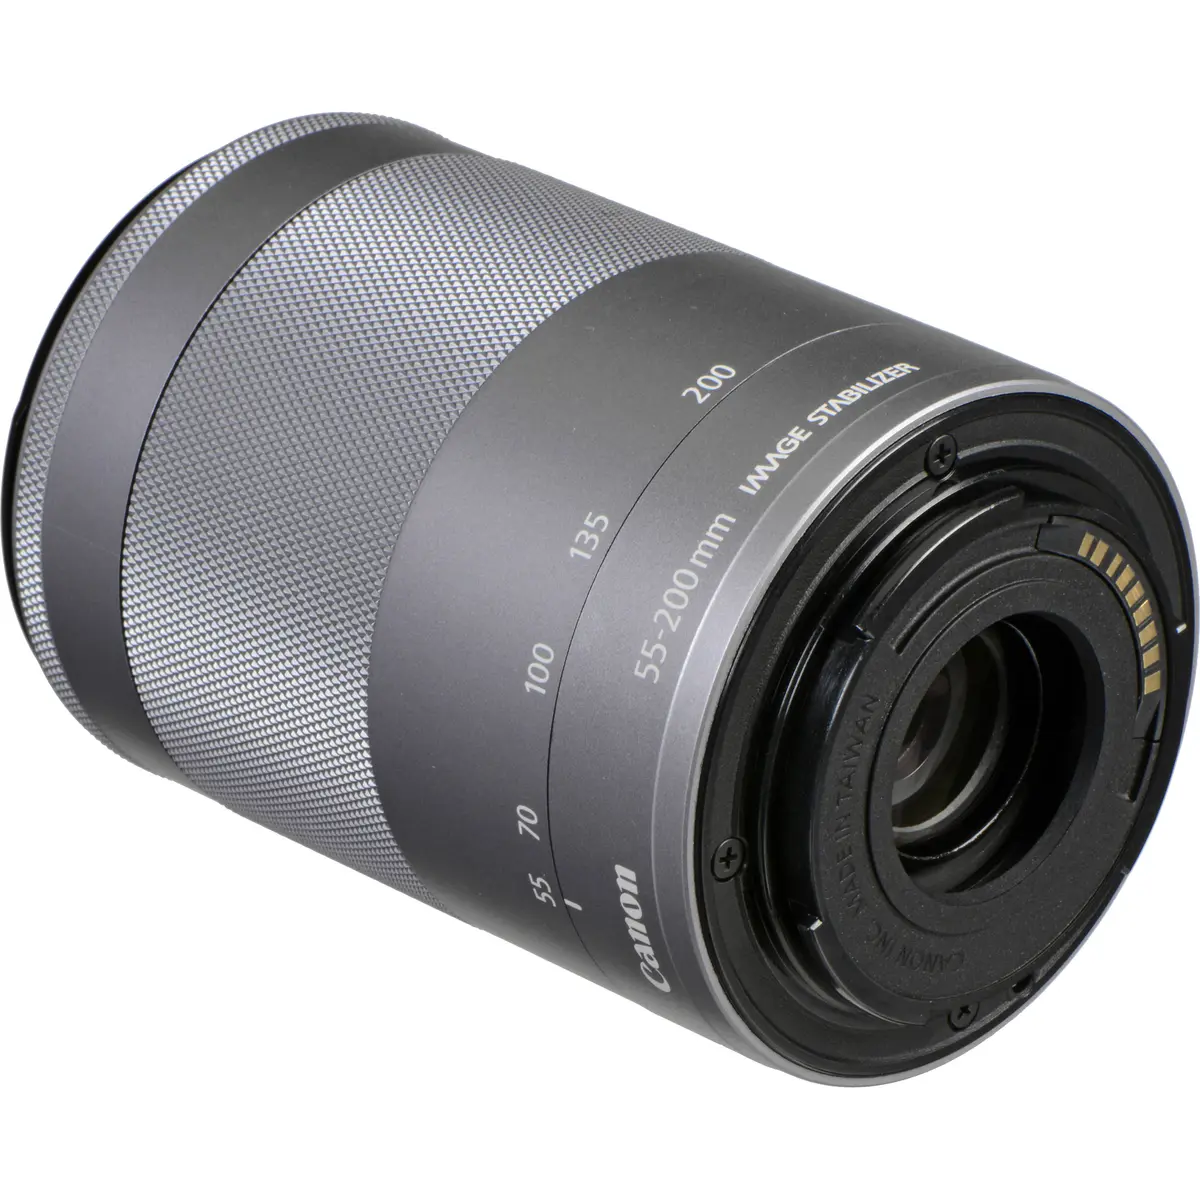 3. Canon EF-M 55-200mm f/4.5-6.3 IS STM Silver